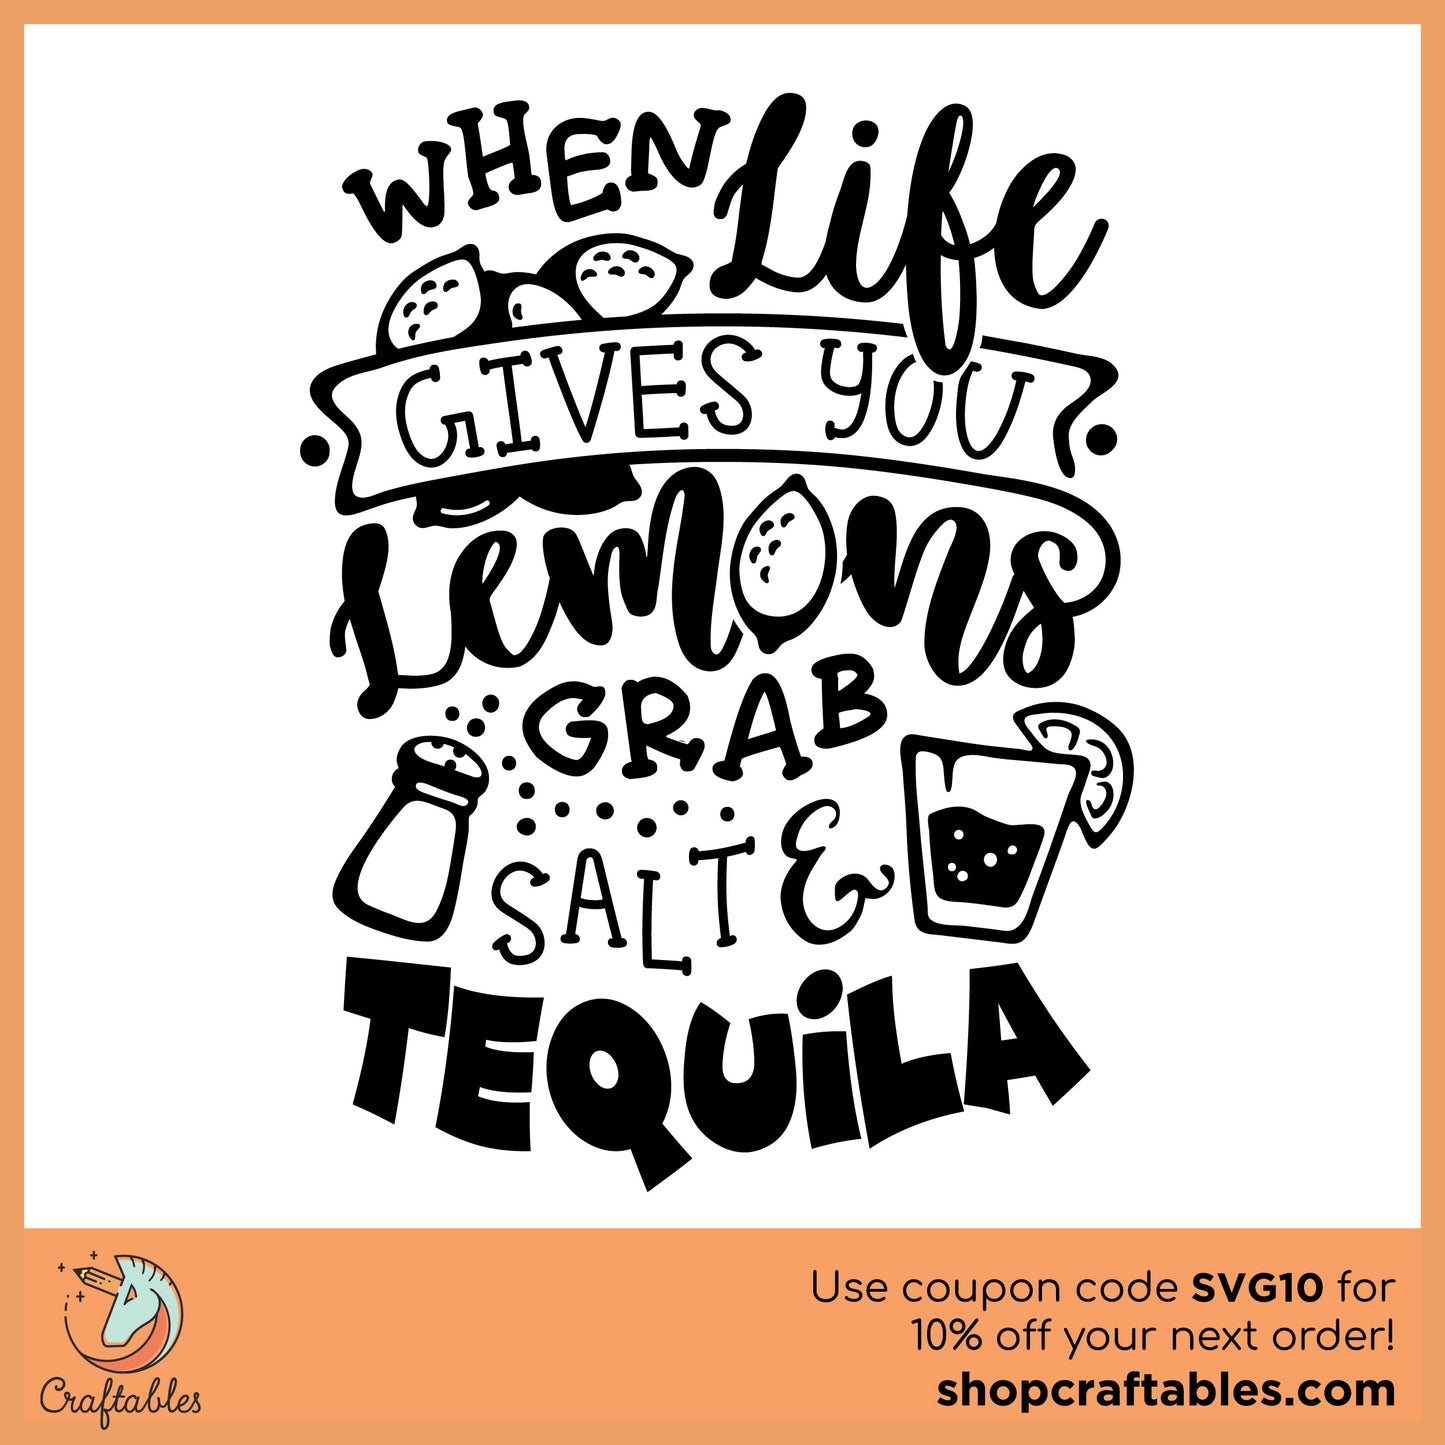 Free When Life Gives You Lemons Grab Salt and Tequila SVG Cut File